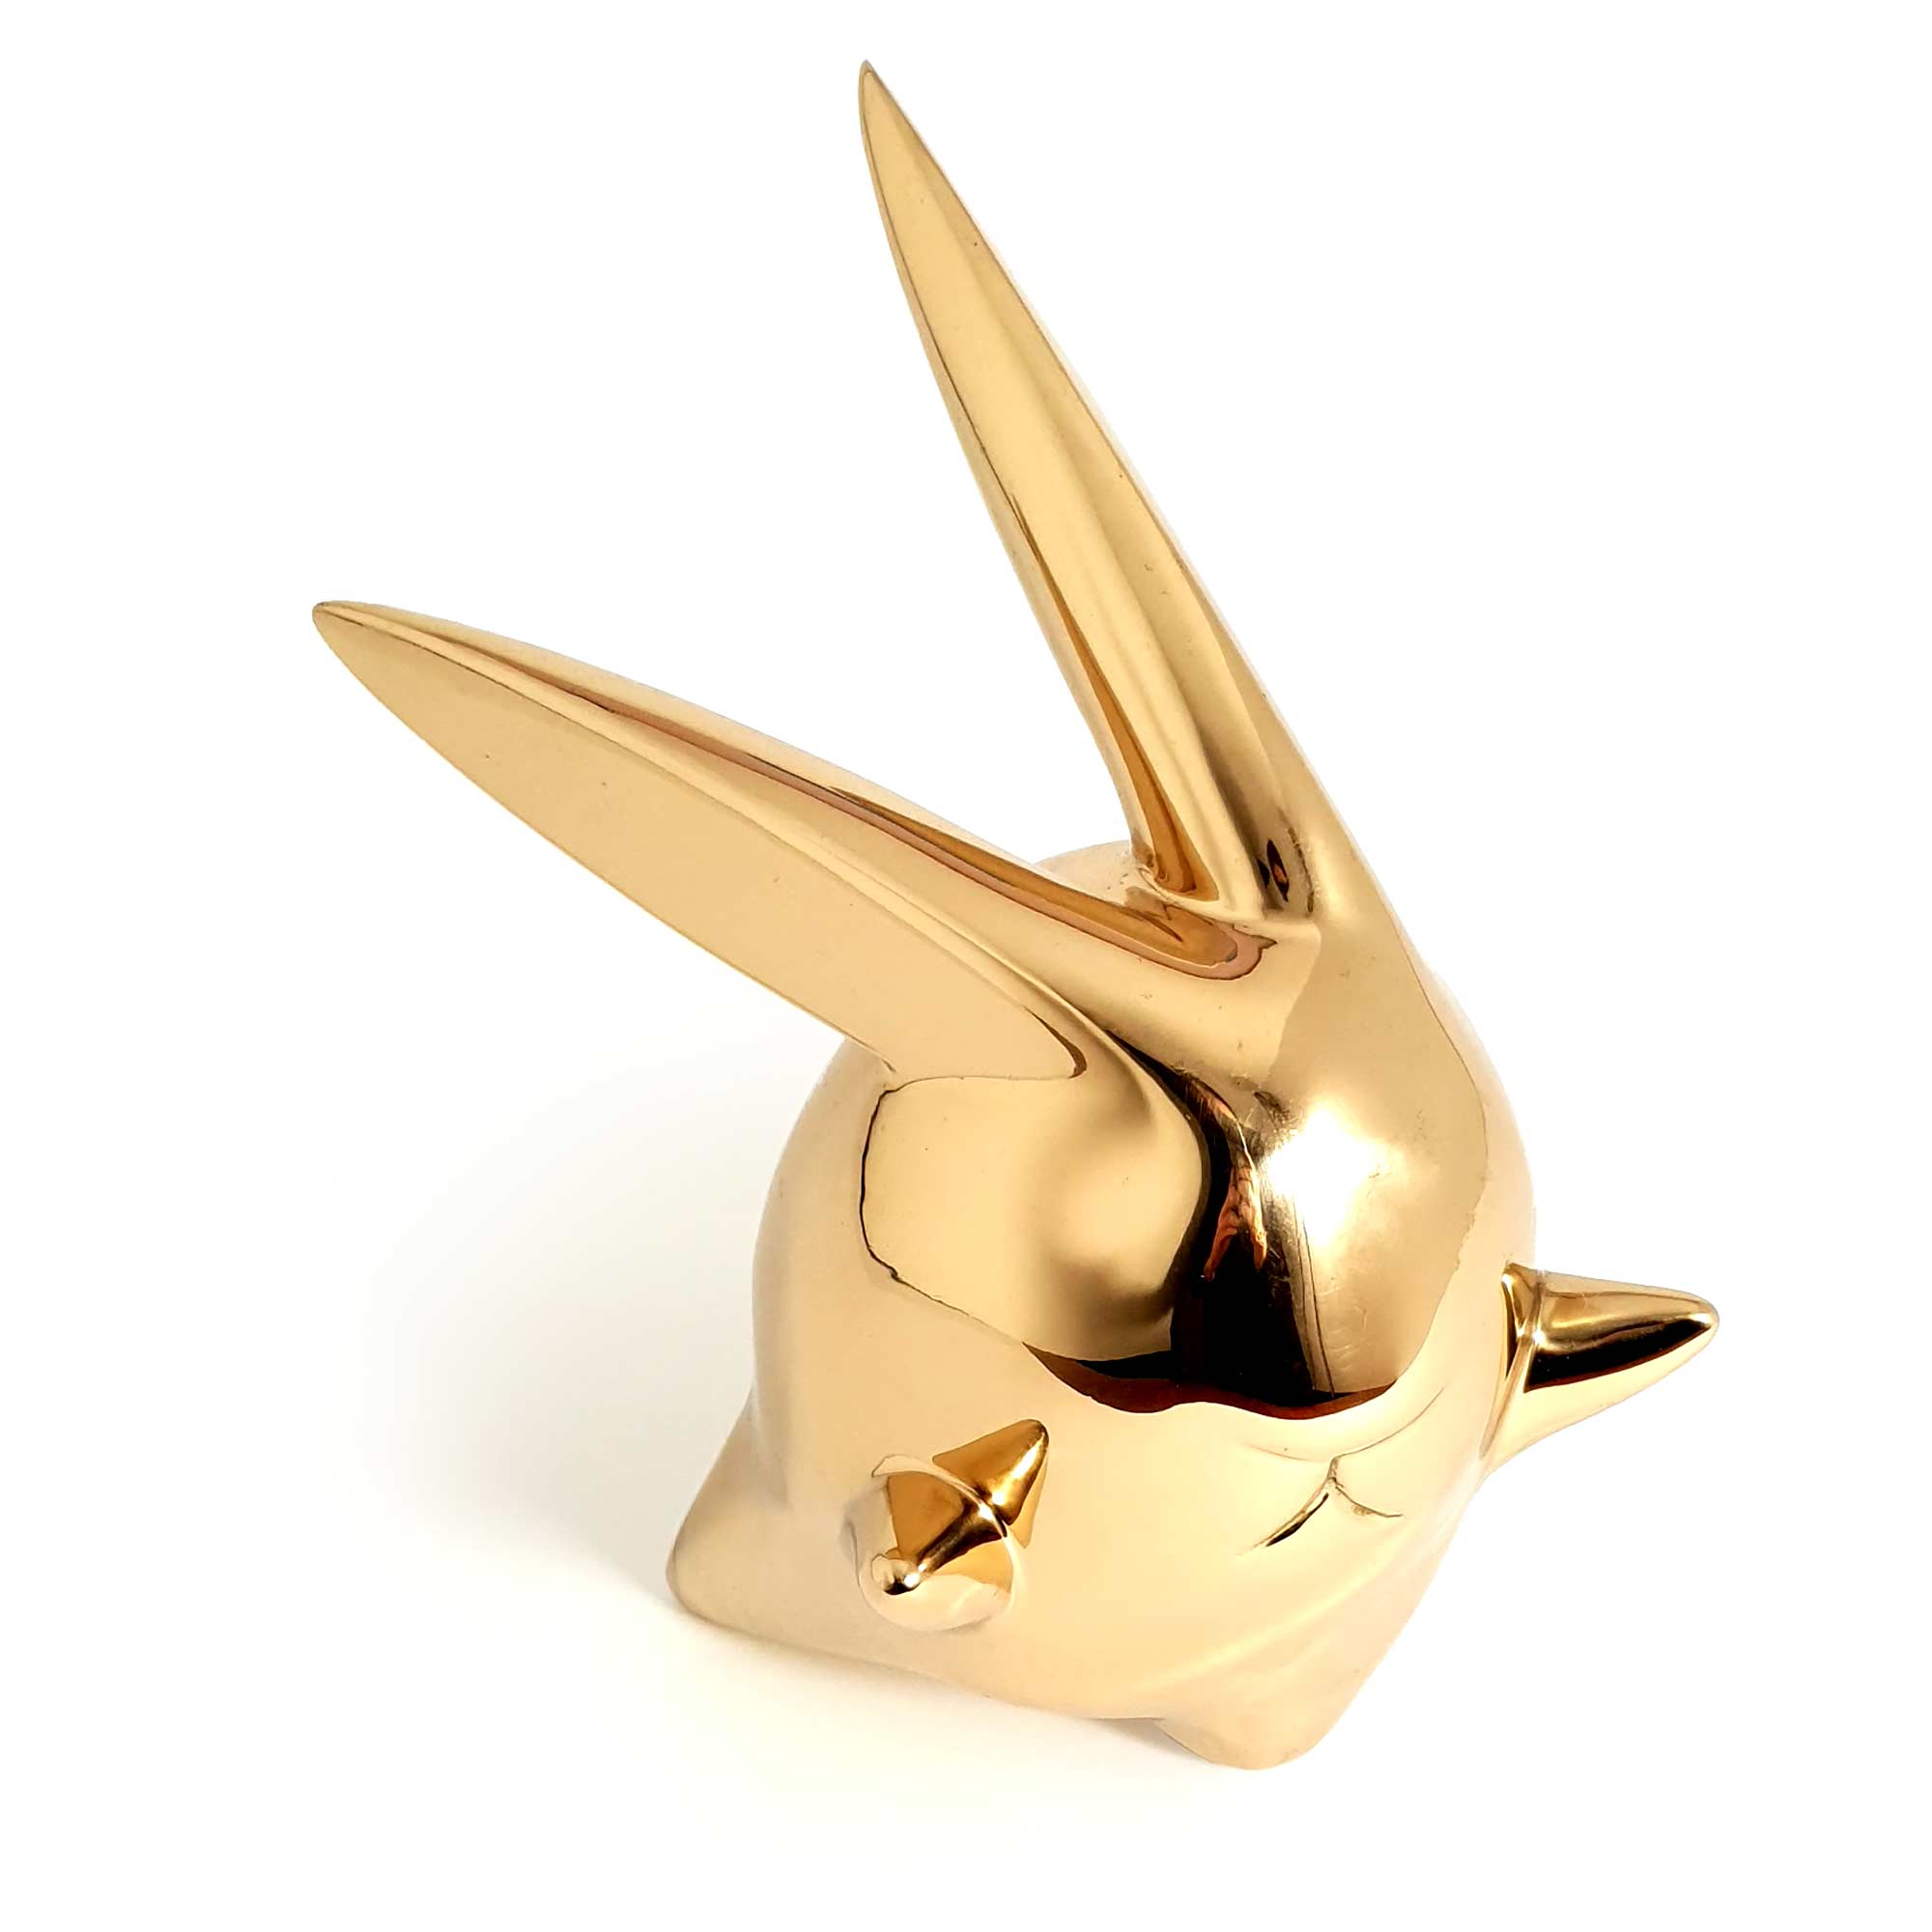 Flight or Fight, bunny rabbit sculpture, gold Mirror Polished Stainless Steel Sculpture, by artist Ferdi B Dick, top view 